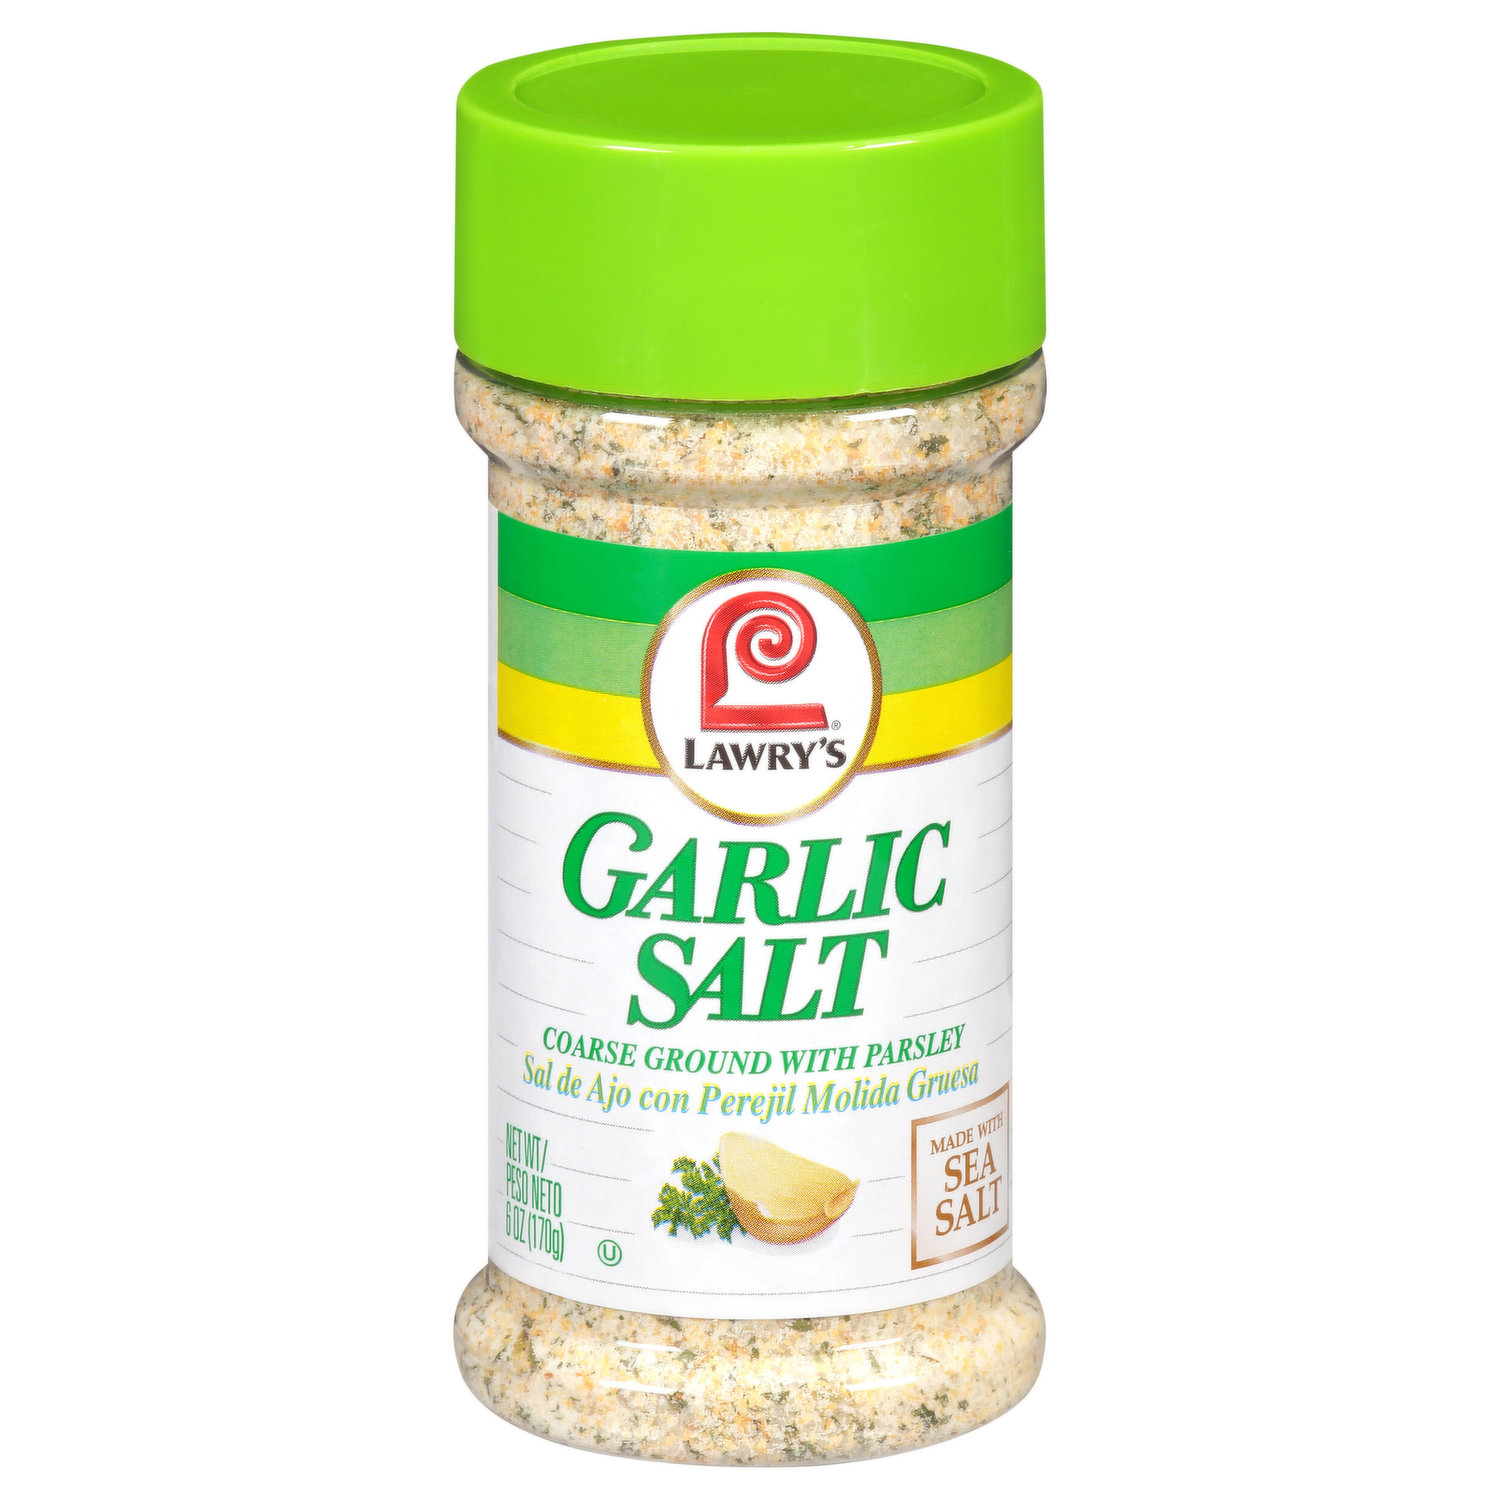 Containers　Salt　Coarse　Lawry´s　Ground　-Ounce　28　of　Pasley　Garlic　Casero　(Pack　3)-　Lawry´s　with